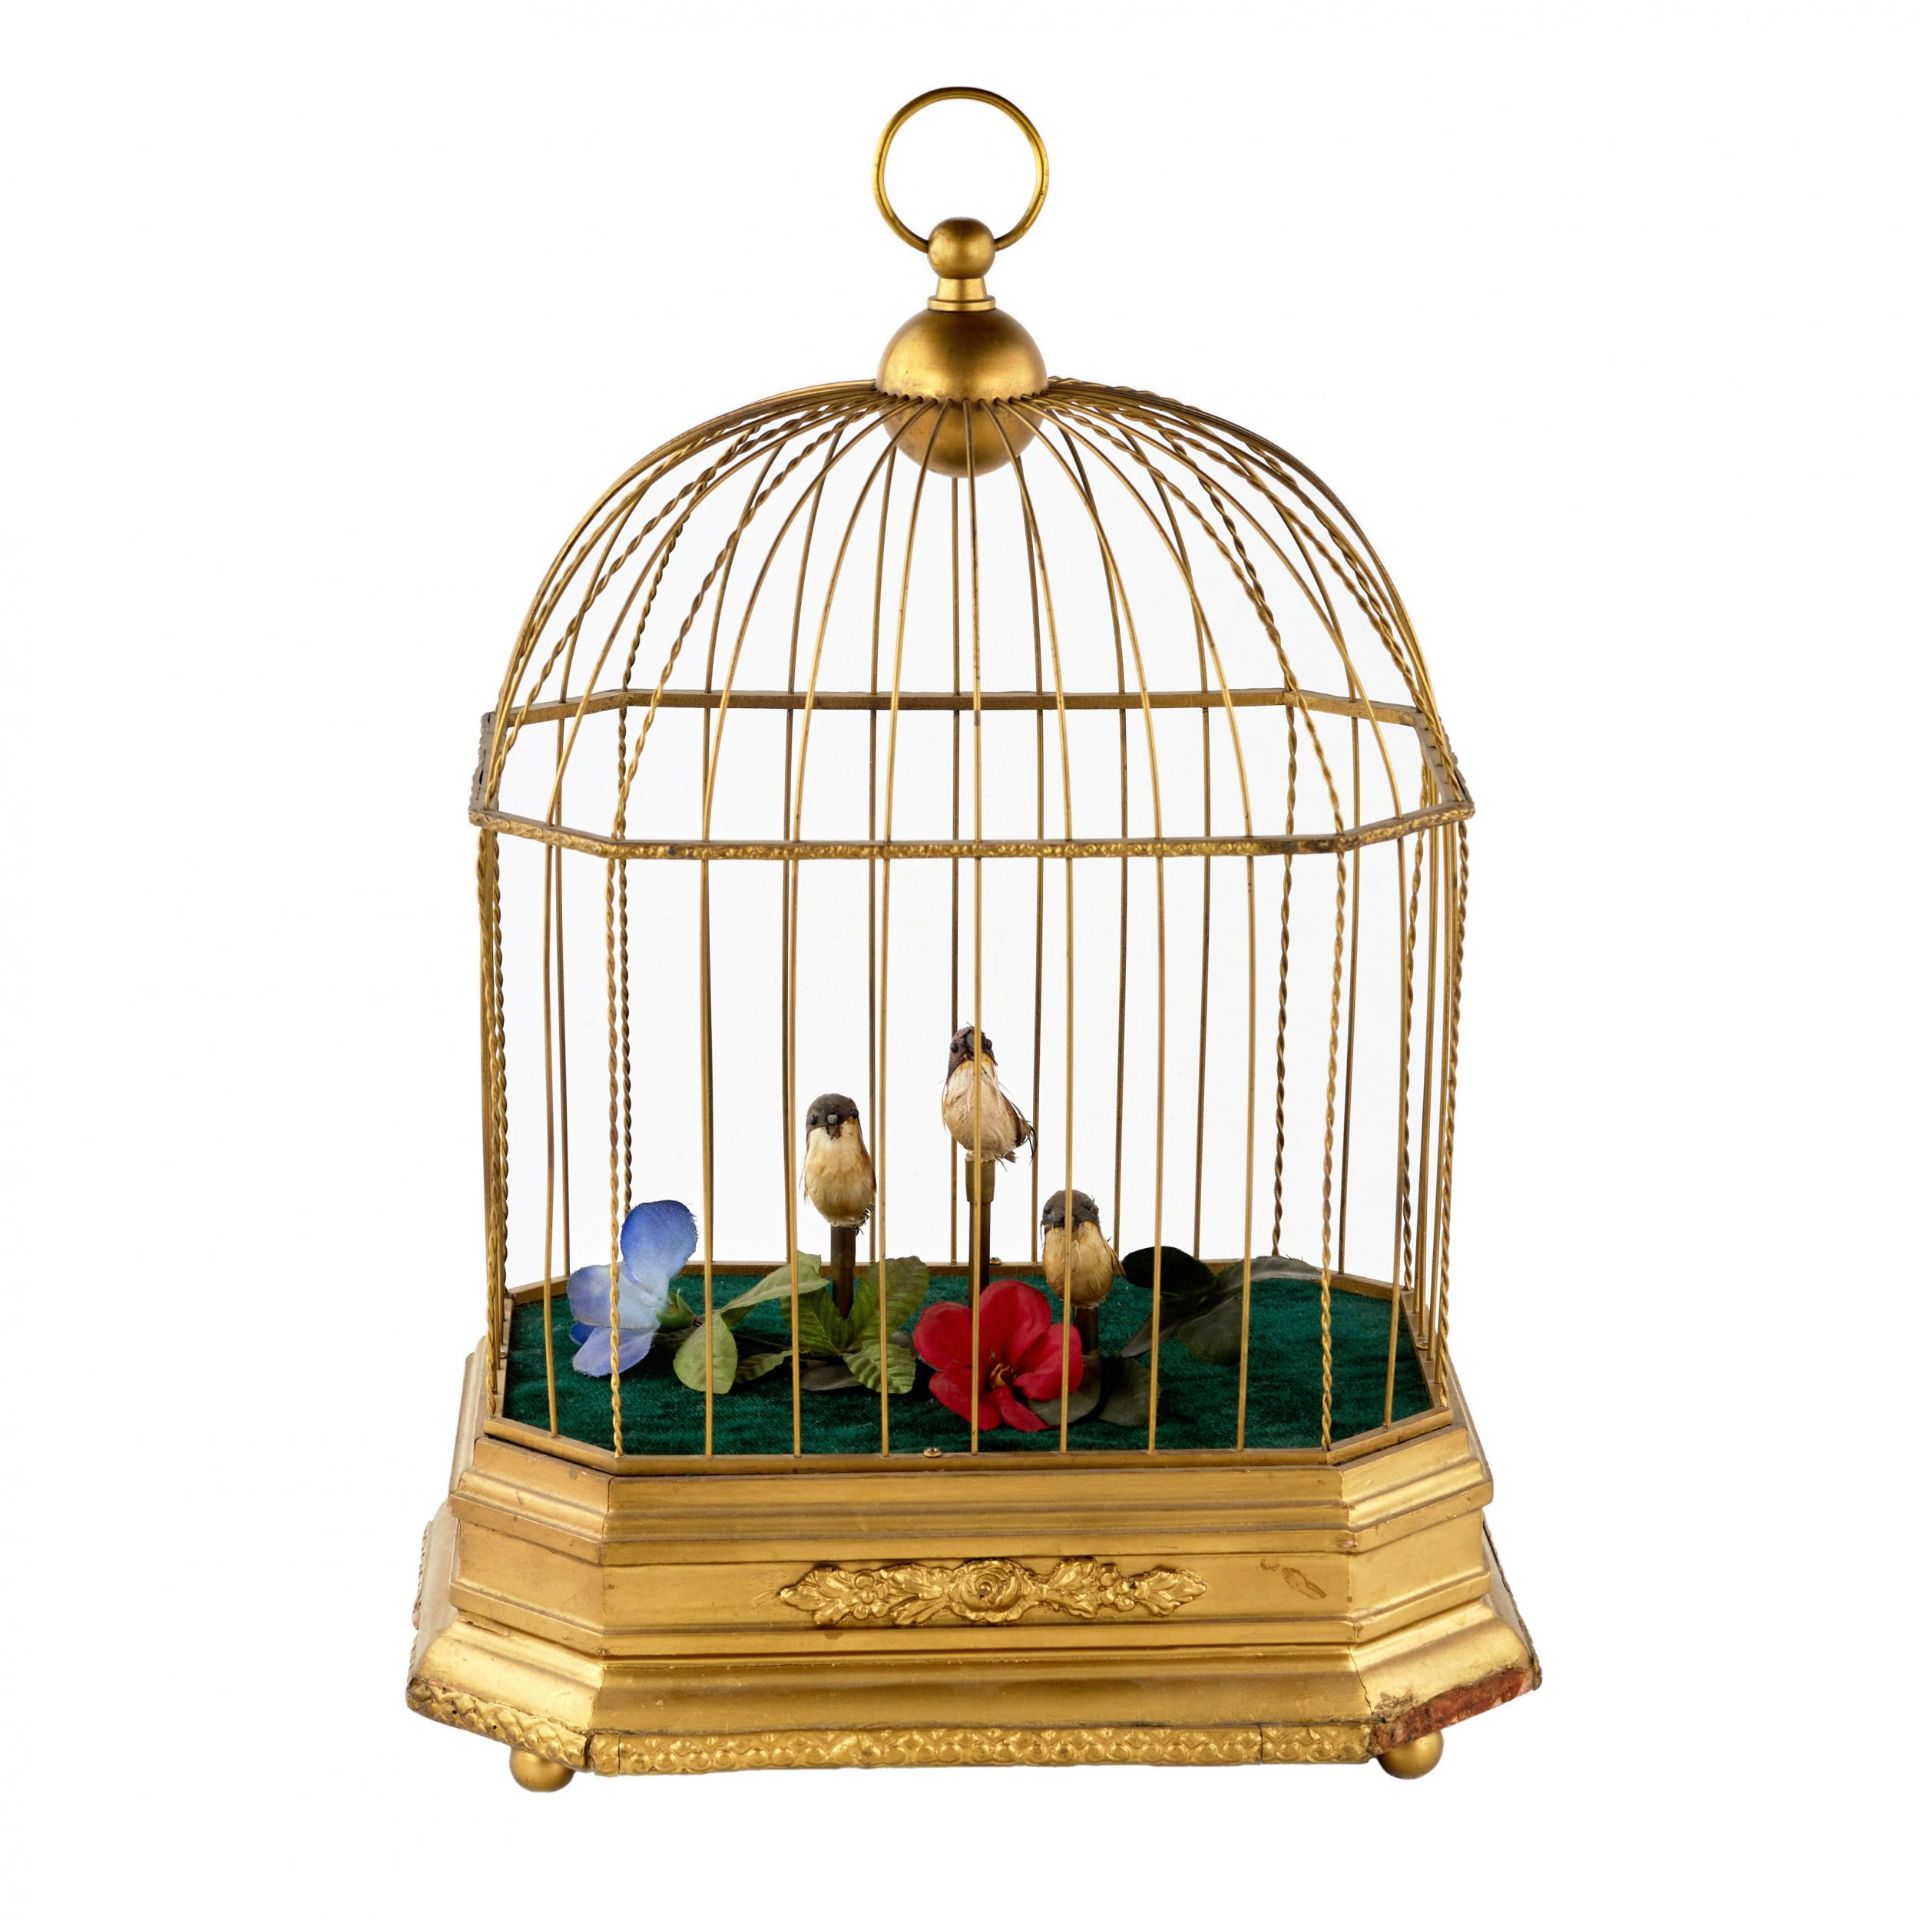 Musical toy - Cage with birds. - Image 2 of 6